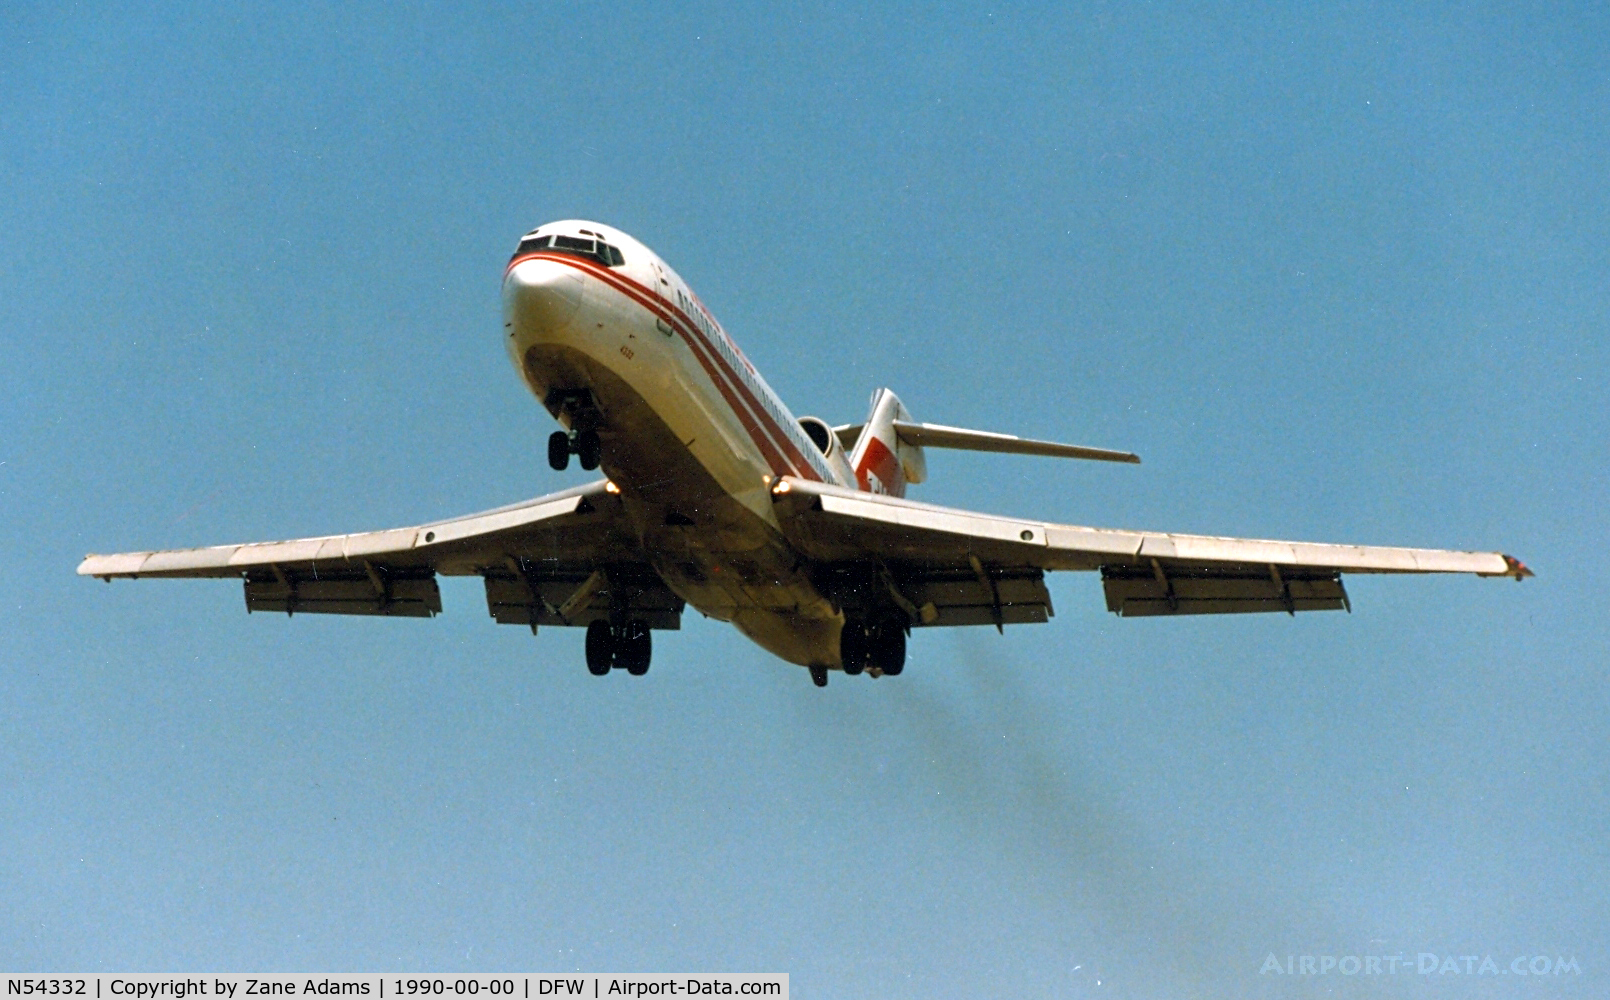 N54332, 1970 Boeing 727-231 C/N 20310, TWA 332 landing at DFW @ 1990 - This aircraft was scrapped 06/99